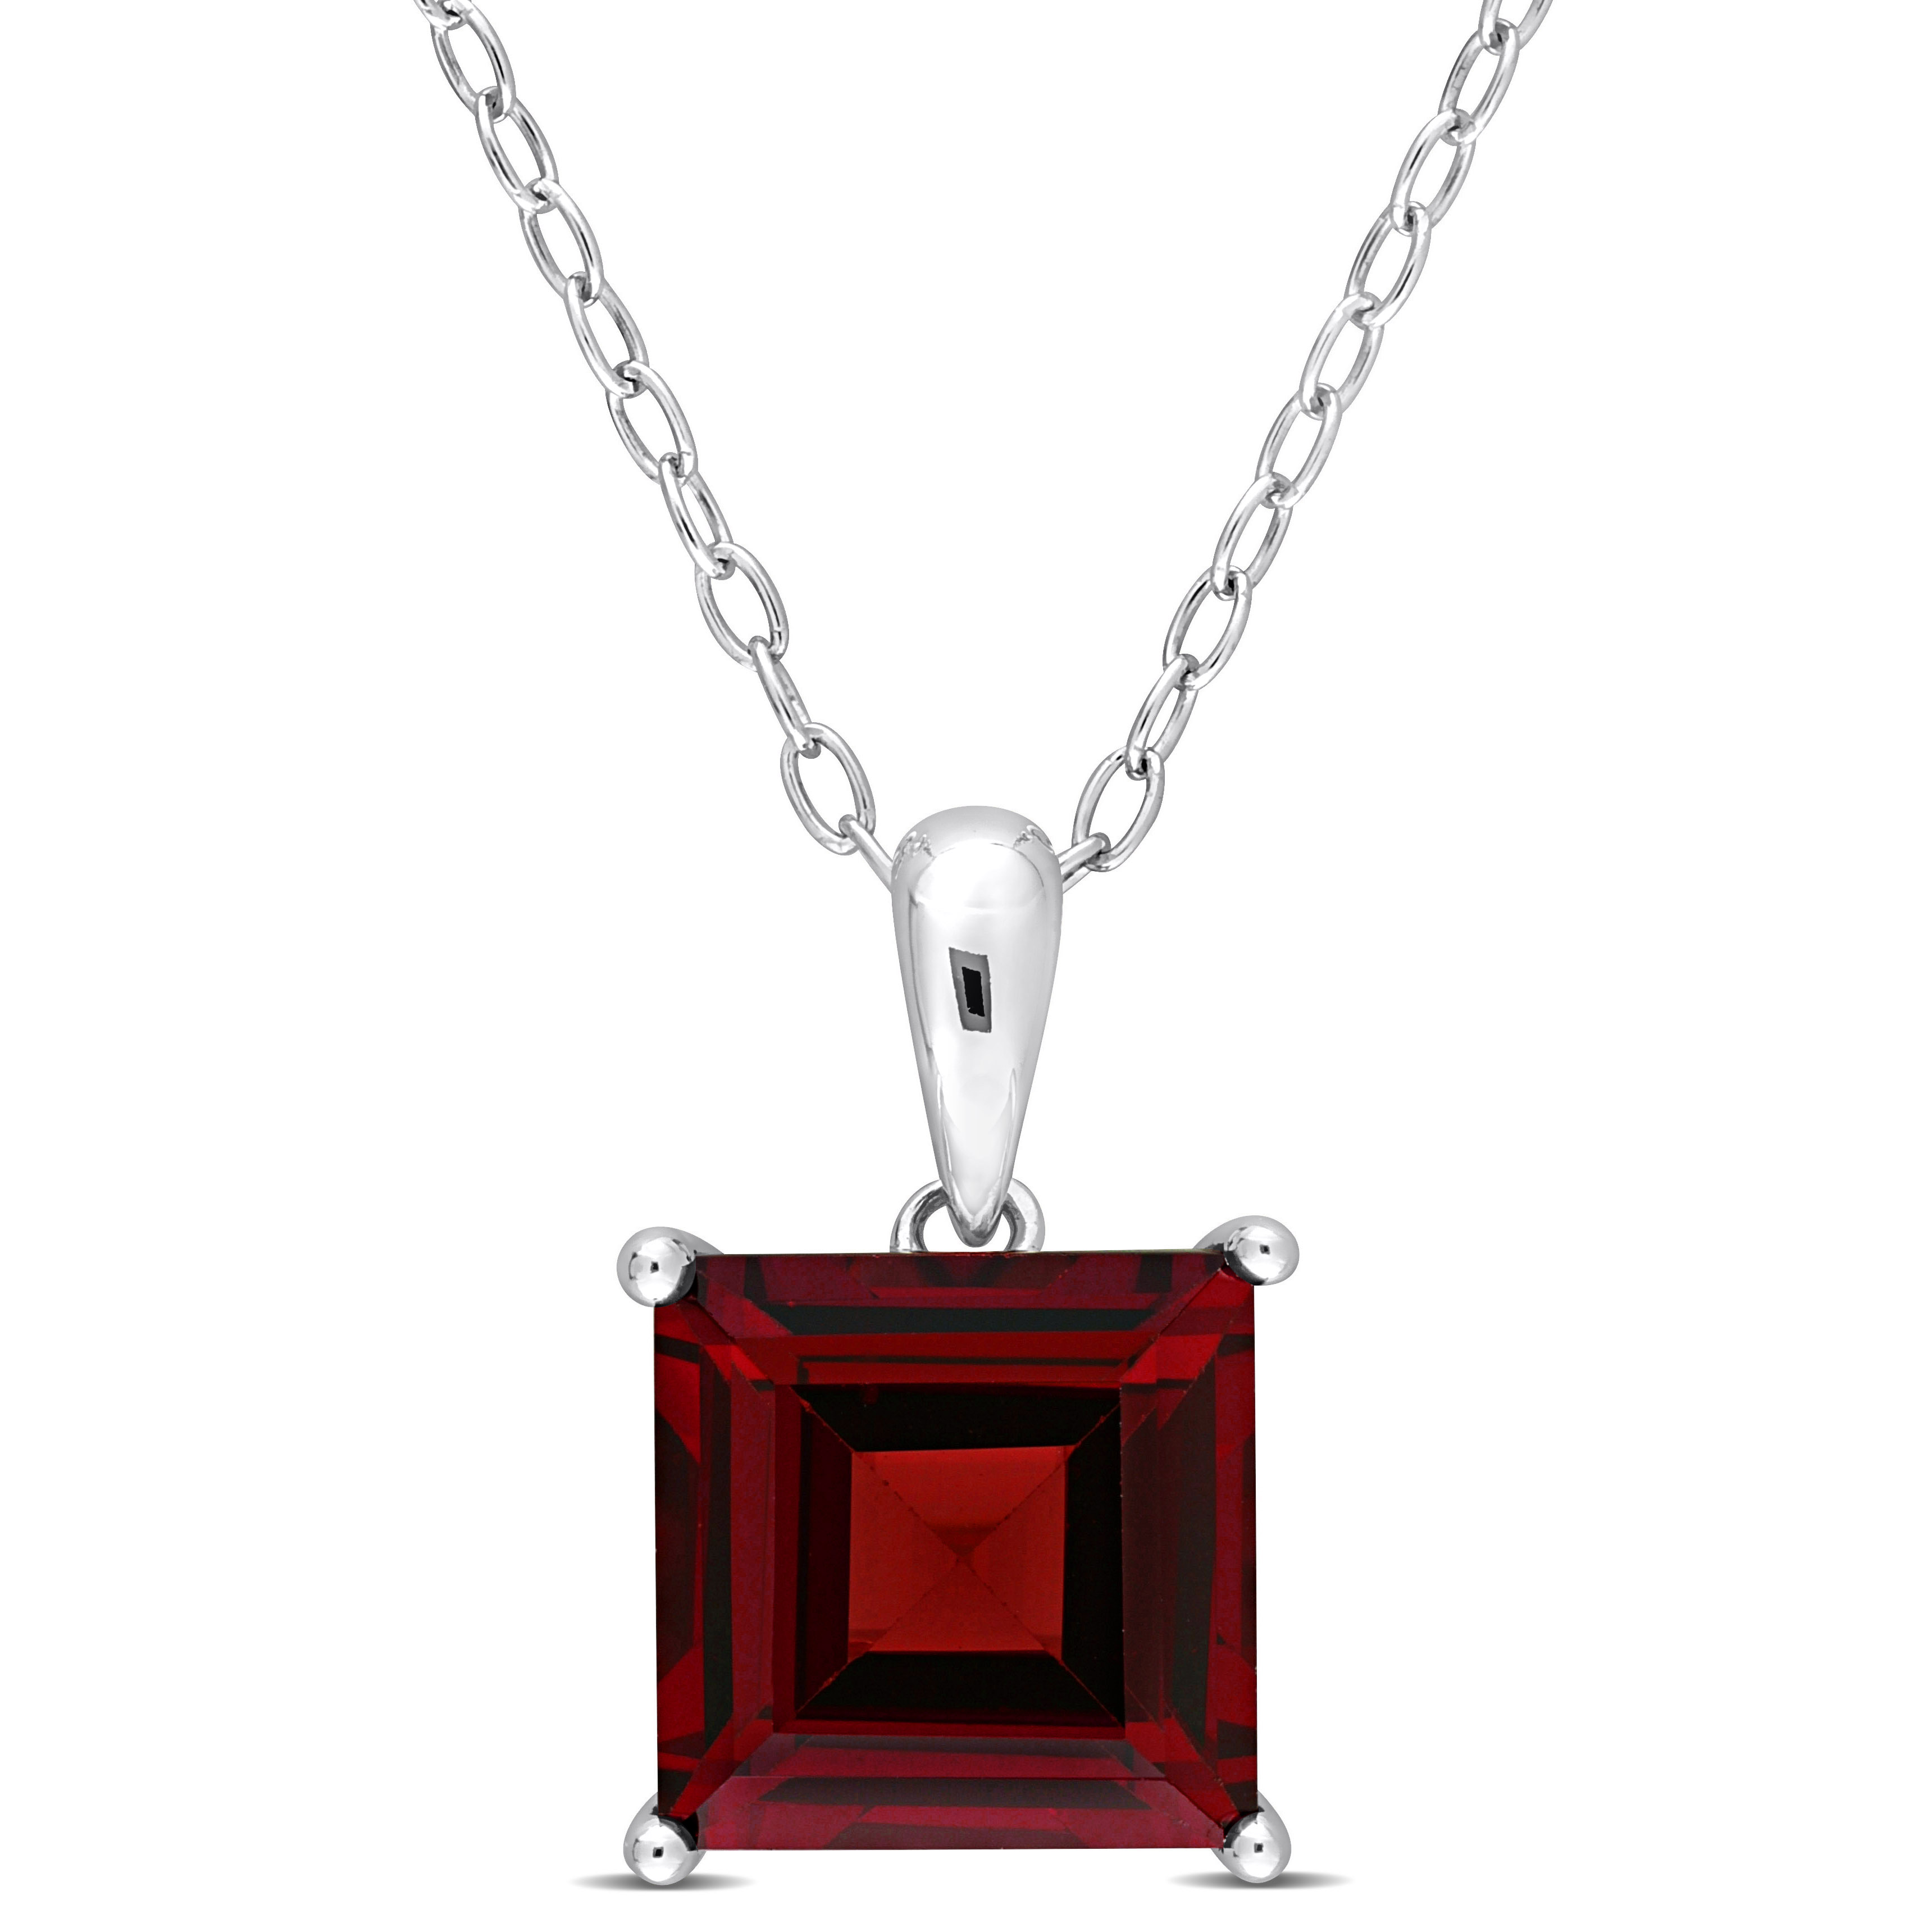 3 1/10 CT TGW Princess Cut Garnet Solitaire Heart Design Pendant with Chain in Sterling Silver - 18 in.